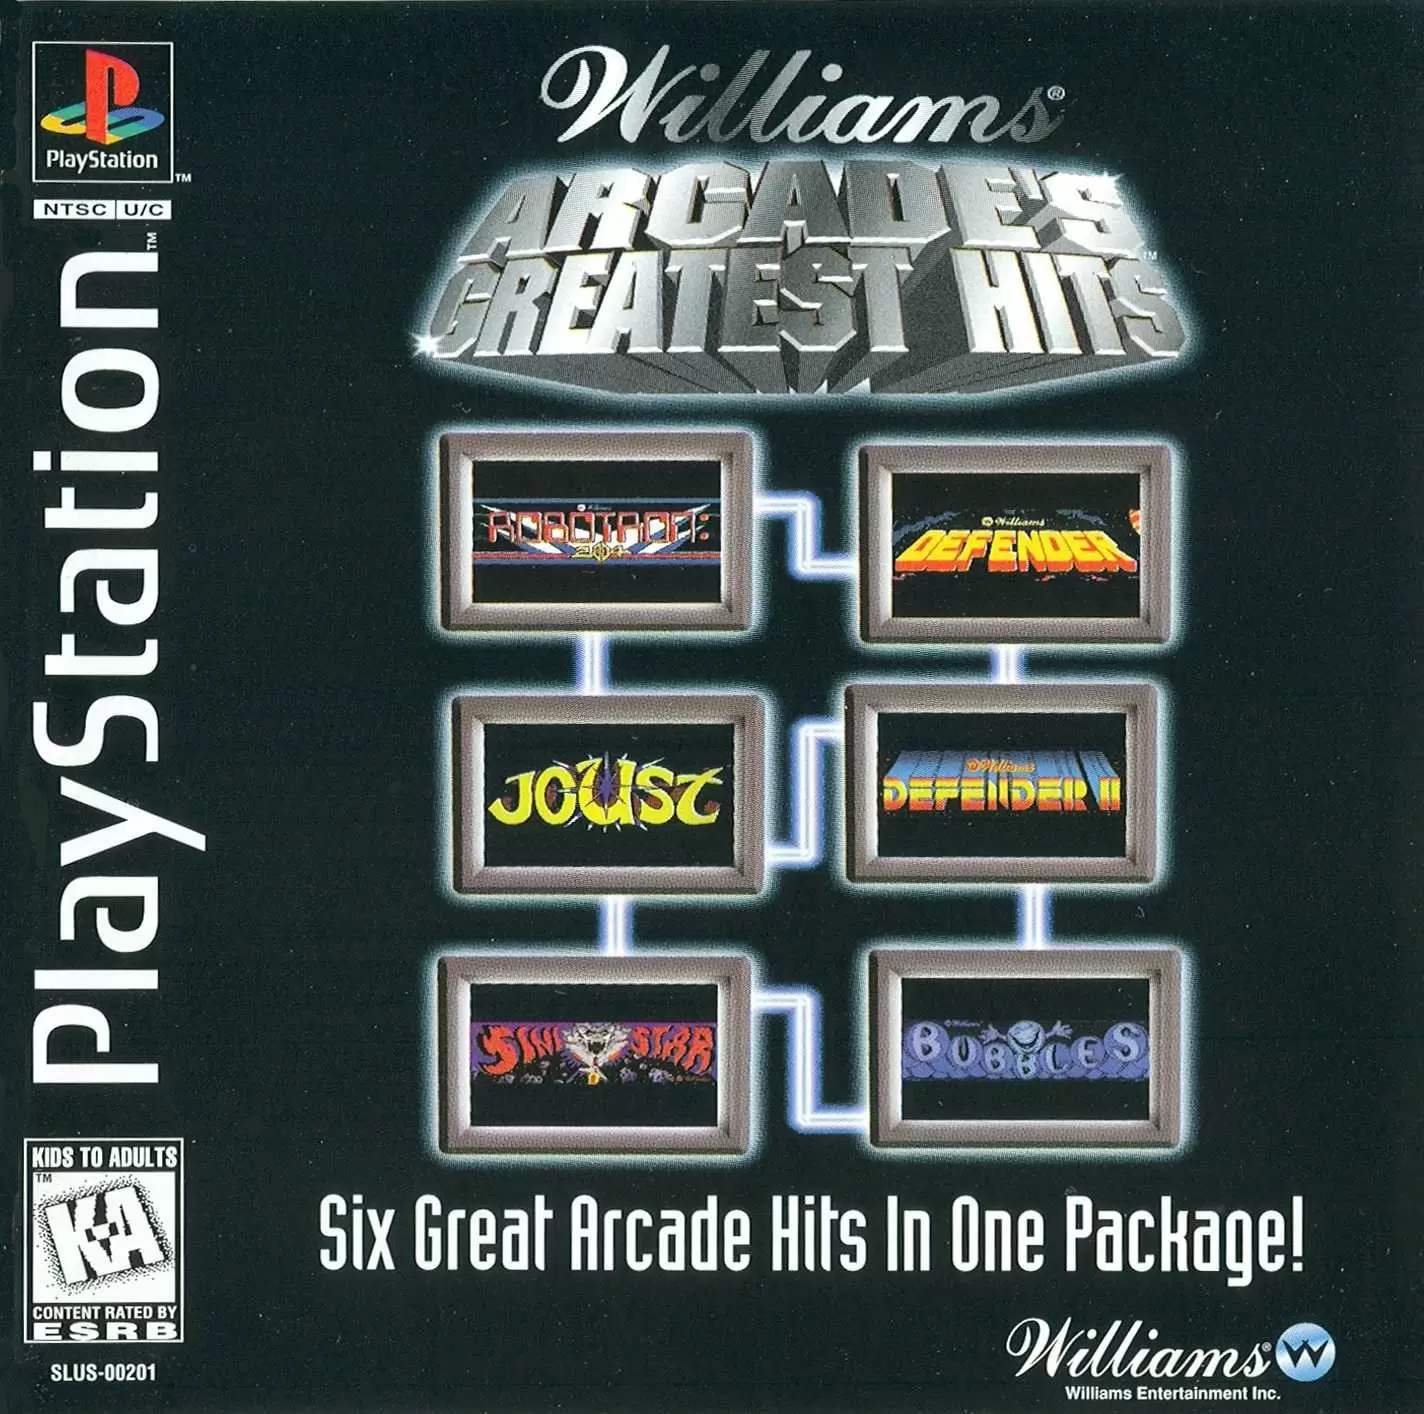 Playstation games - Williams Arcade\'s Greatest Hits